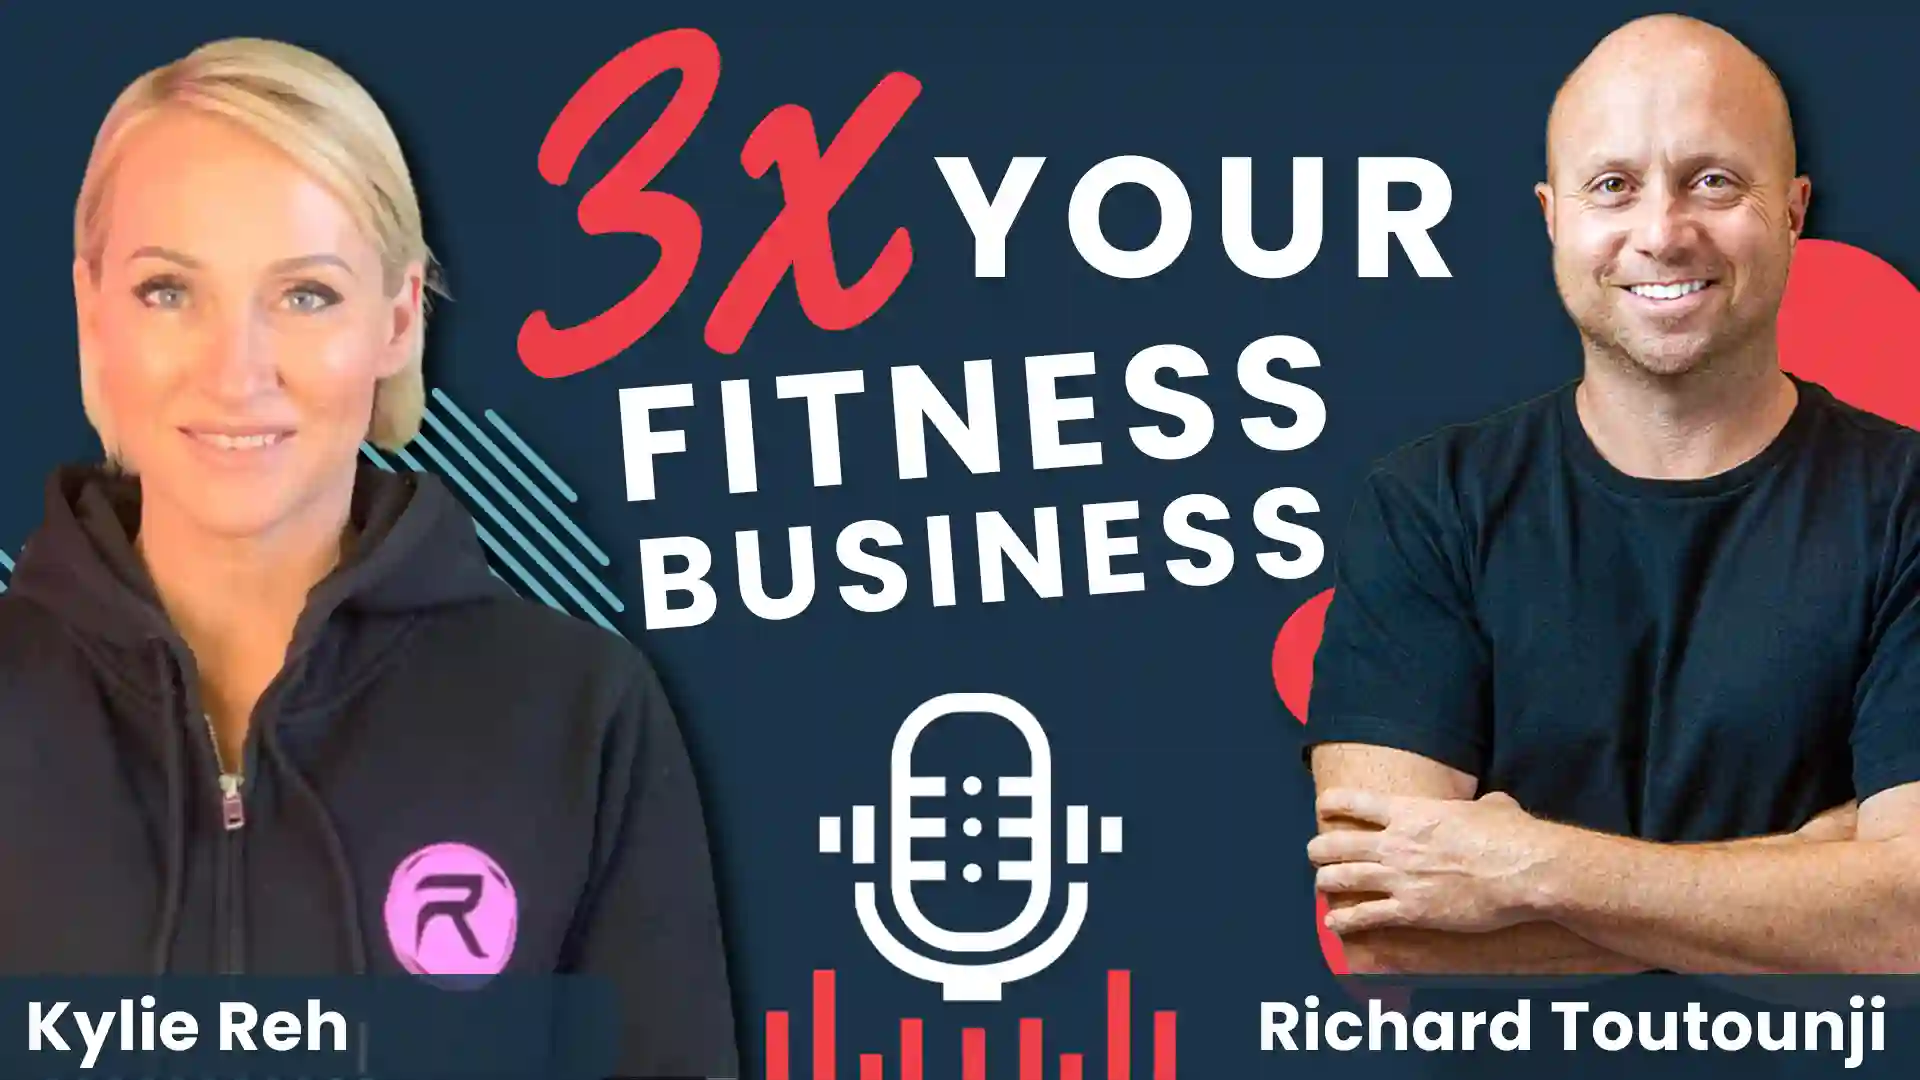 You are currently viewing Trust The Marketing Process to 3X Your Fitness Business Featuring Kylie Reh